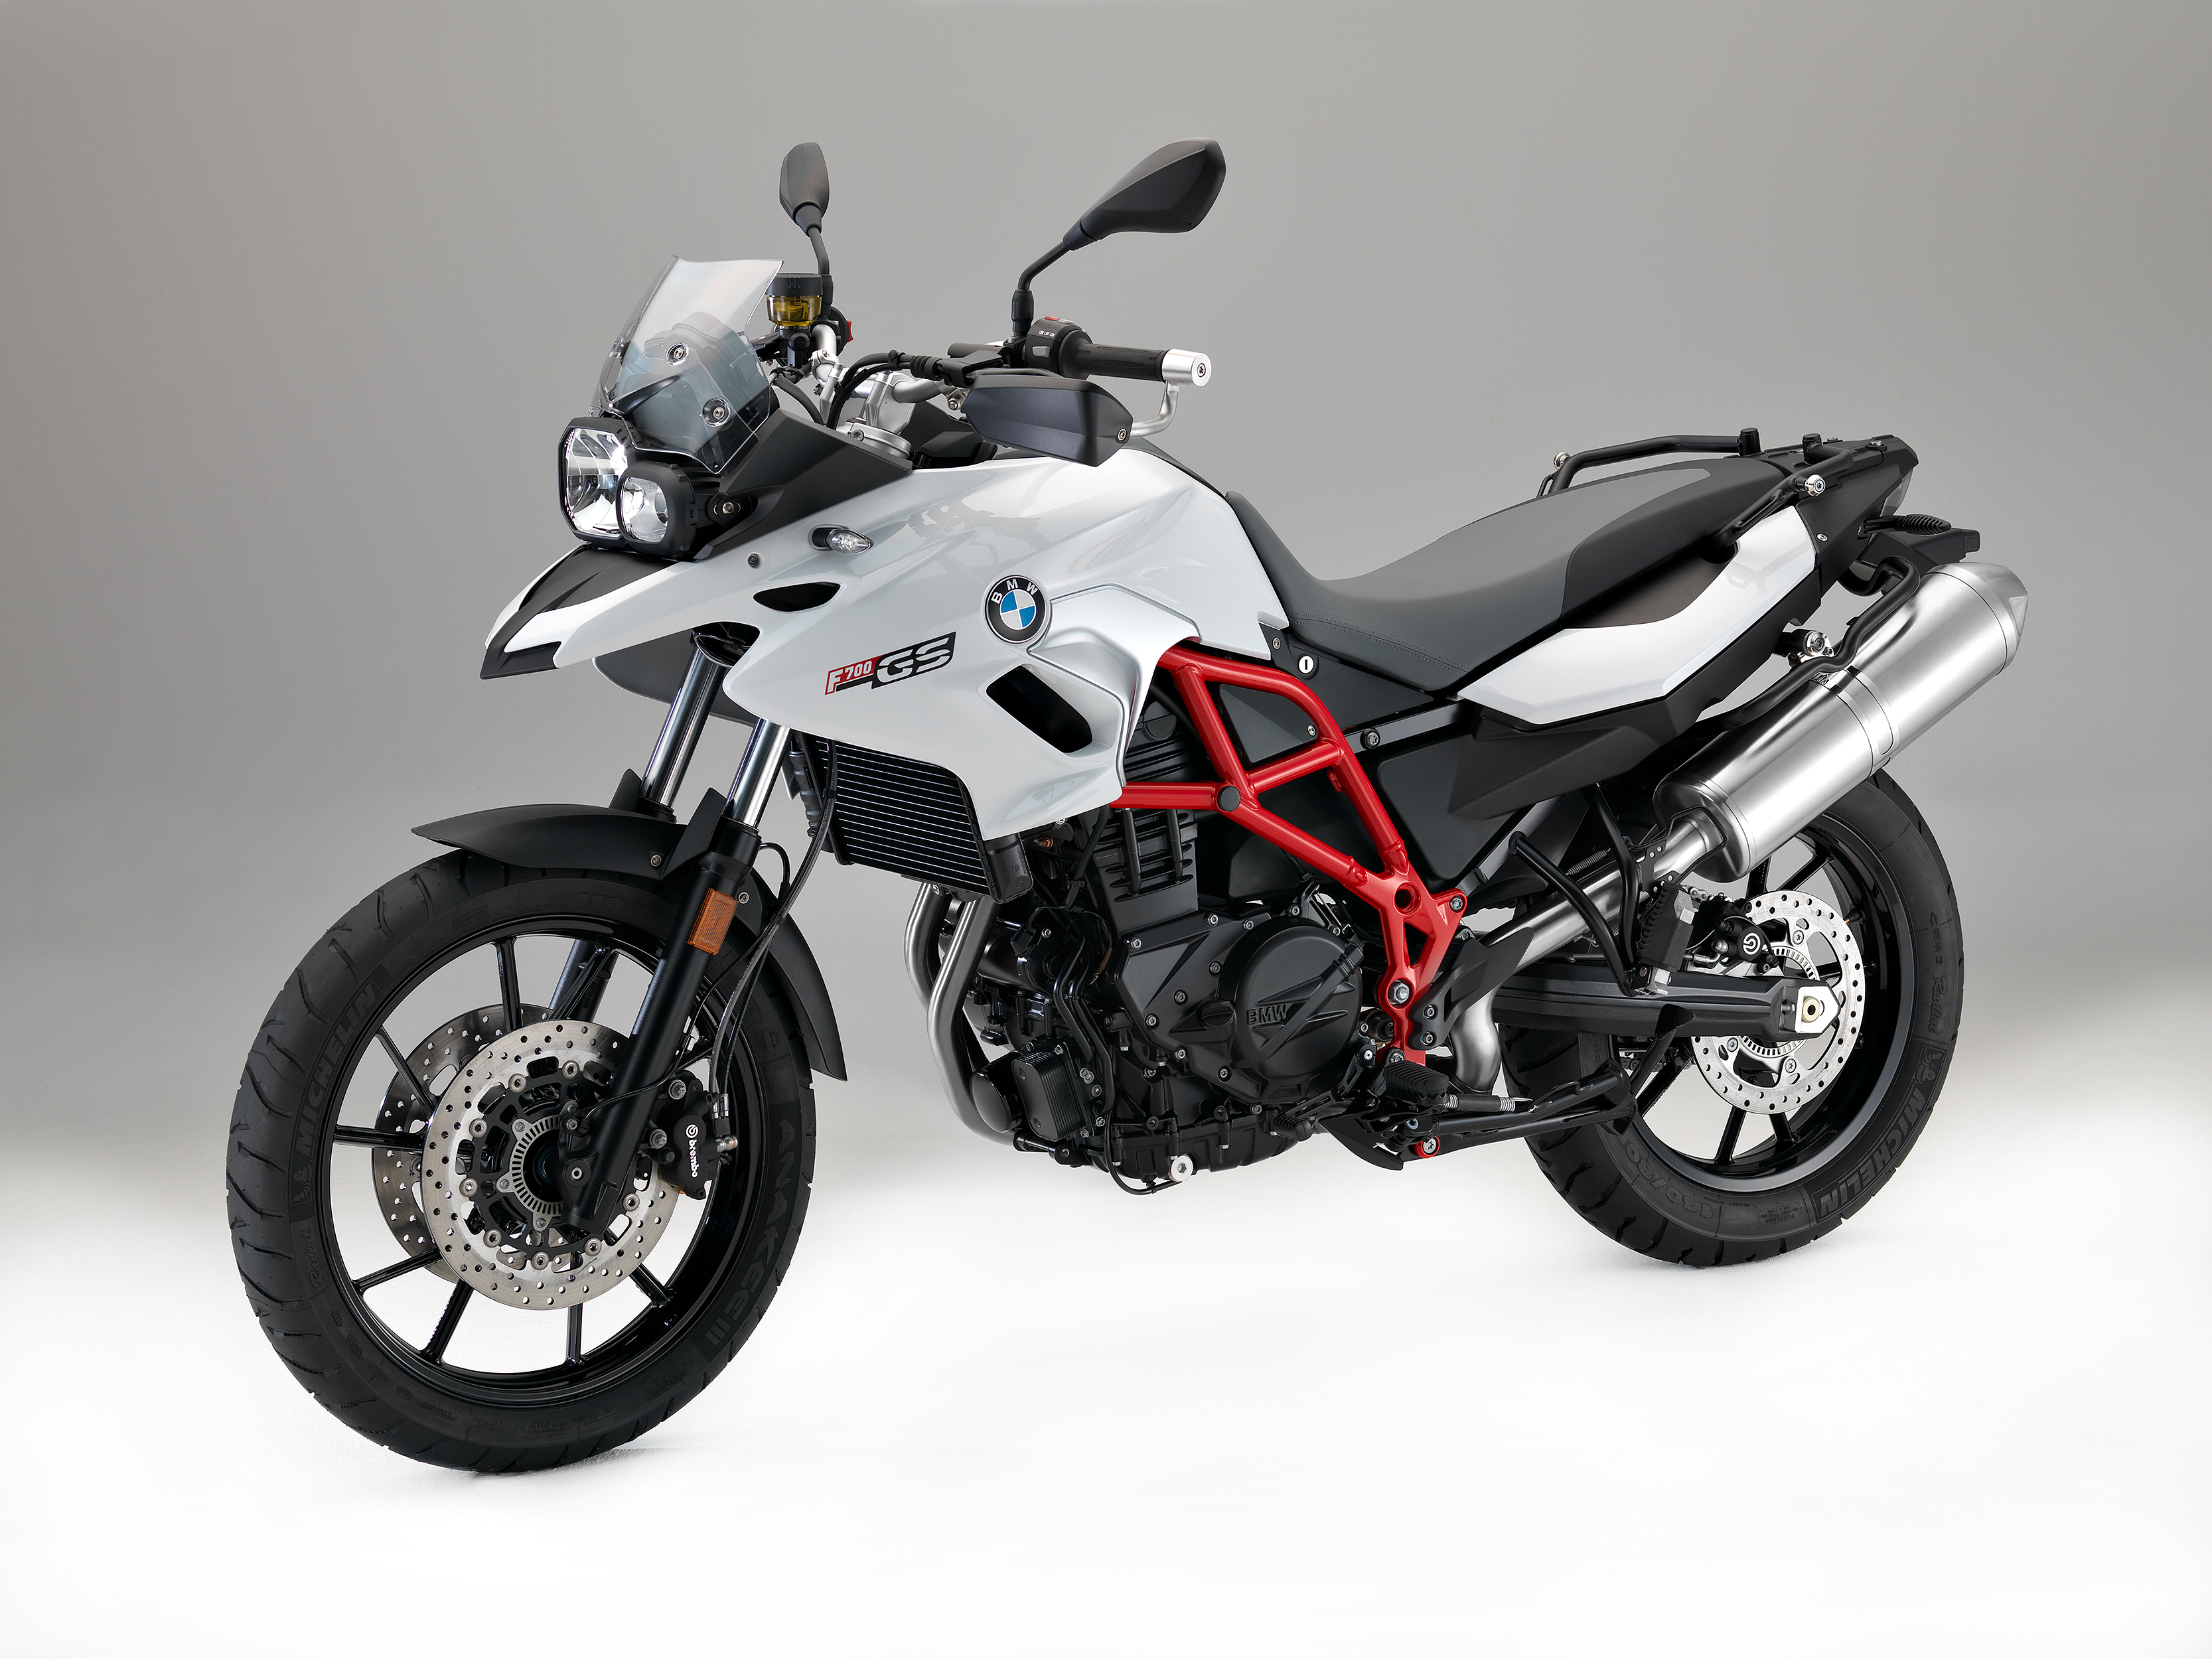 Updates for BMW F700GS and F800GS